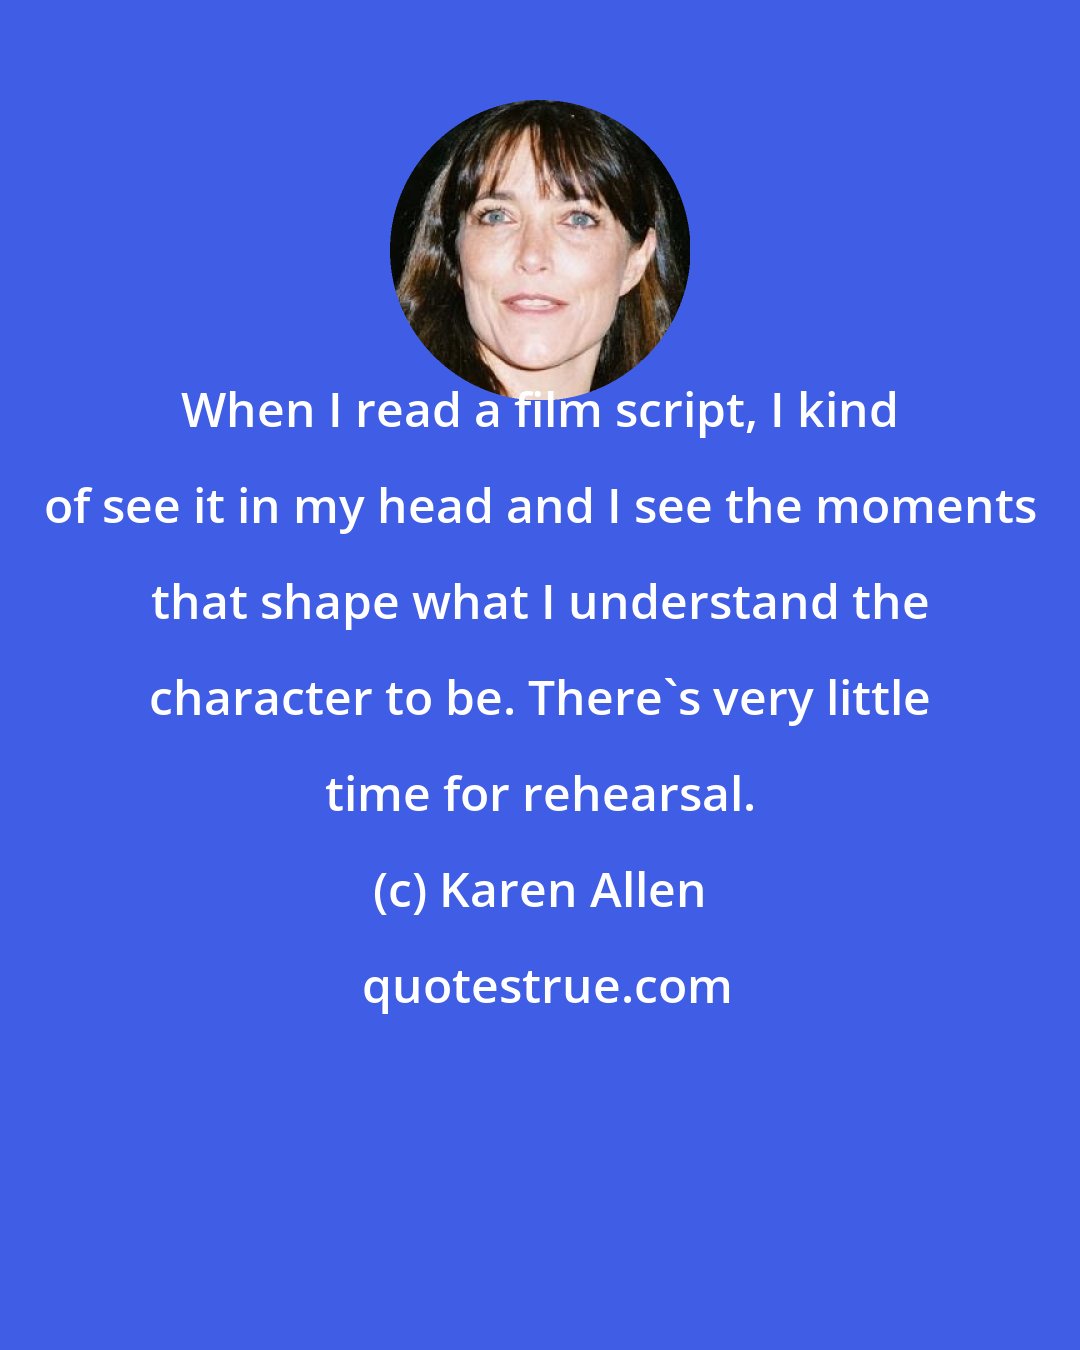 Karen Allen: When I read a film script, I kind of see it in my head and I see the moments that shape what I understand the character to be. There's very little time for rehearsal.